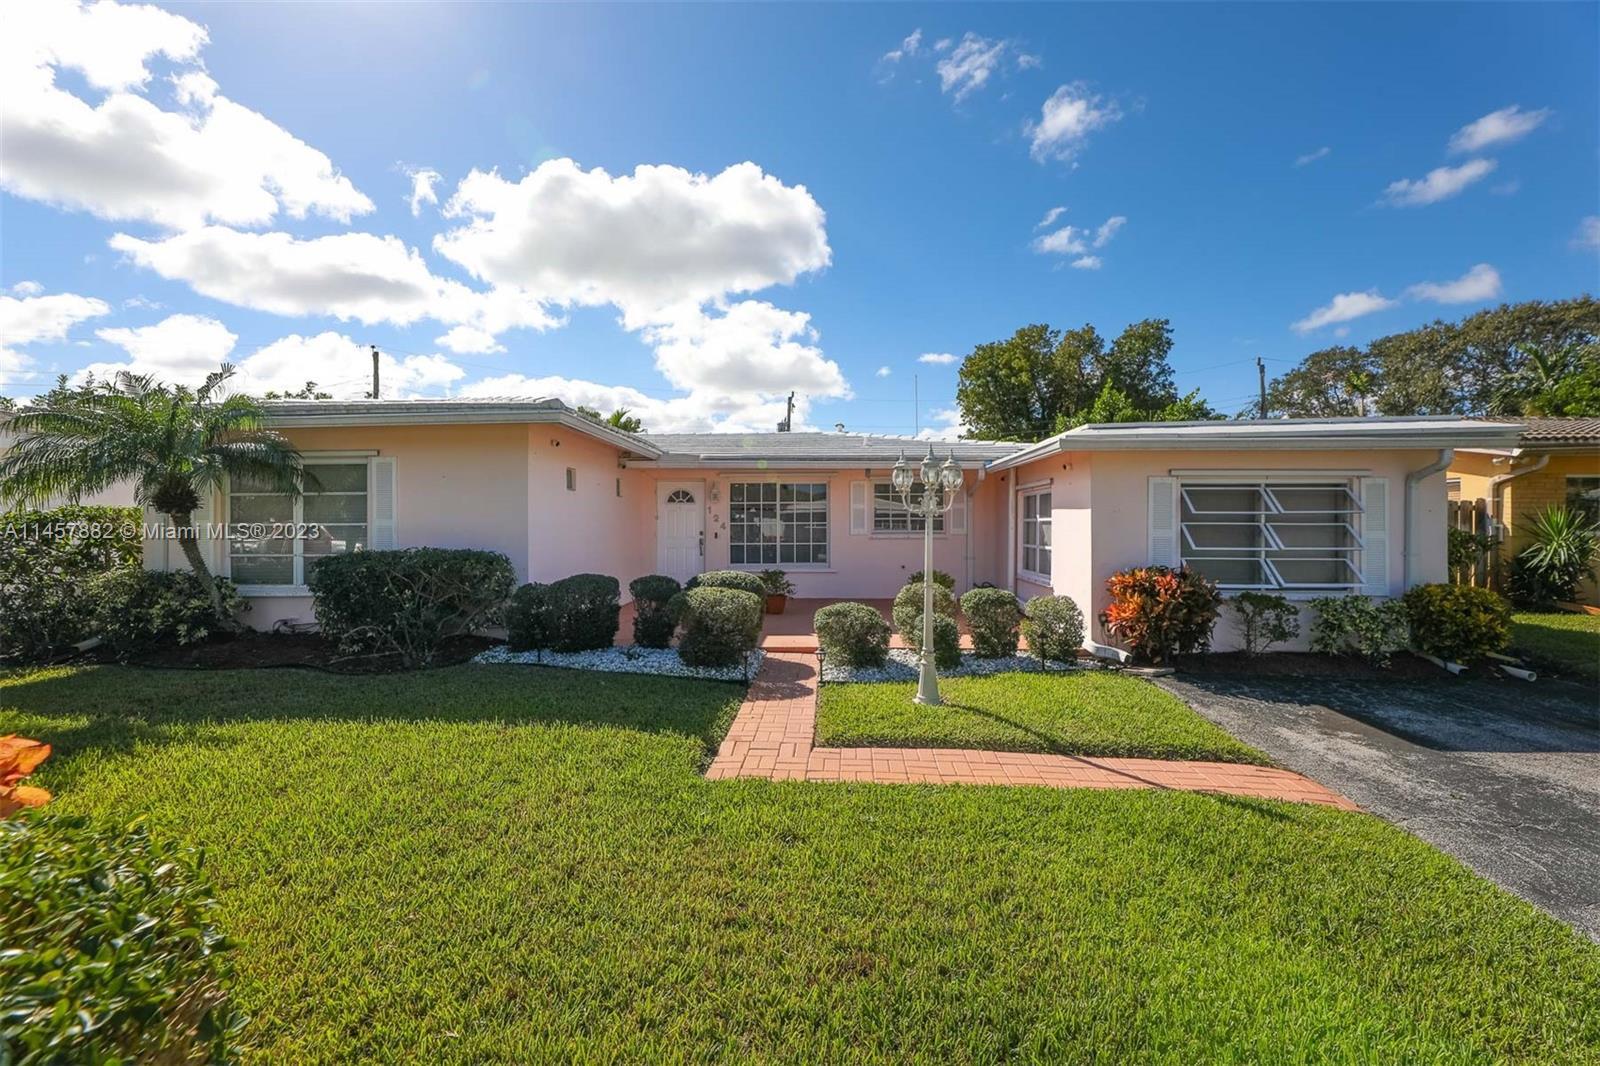 Tucked Away on A Quiet Street in One of Wilton Manors' Most Sought Out Neighborhoods. This Lovely Ho